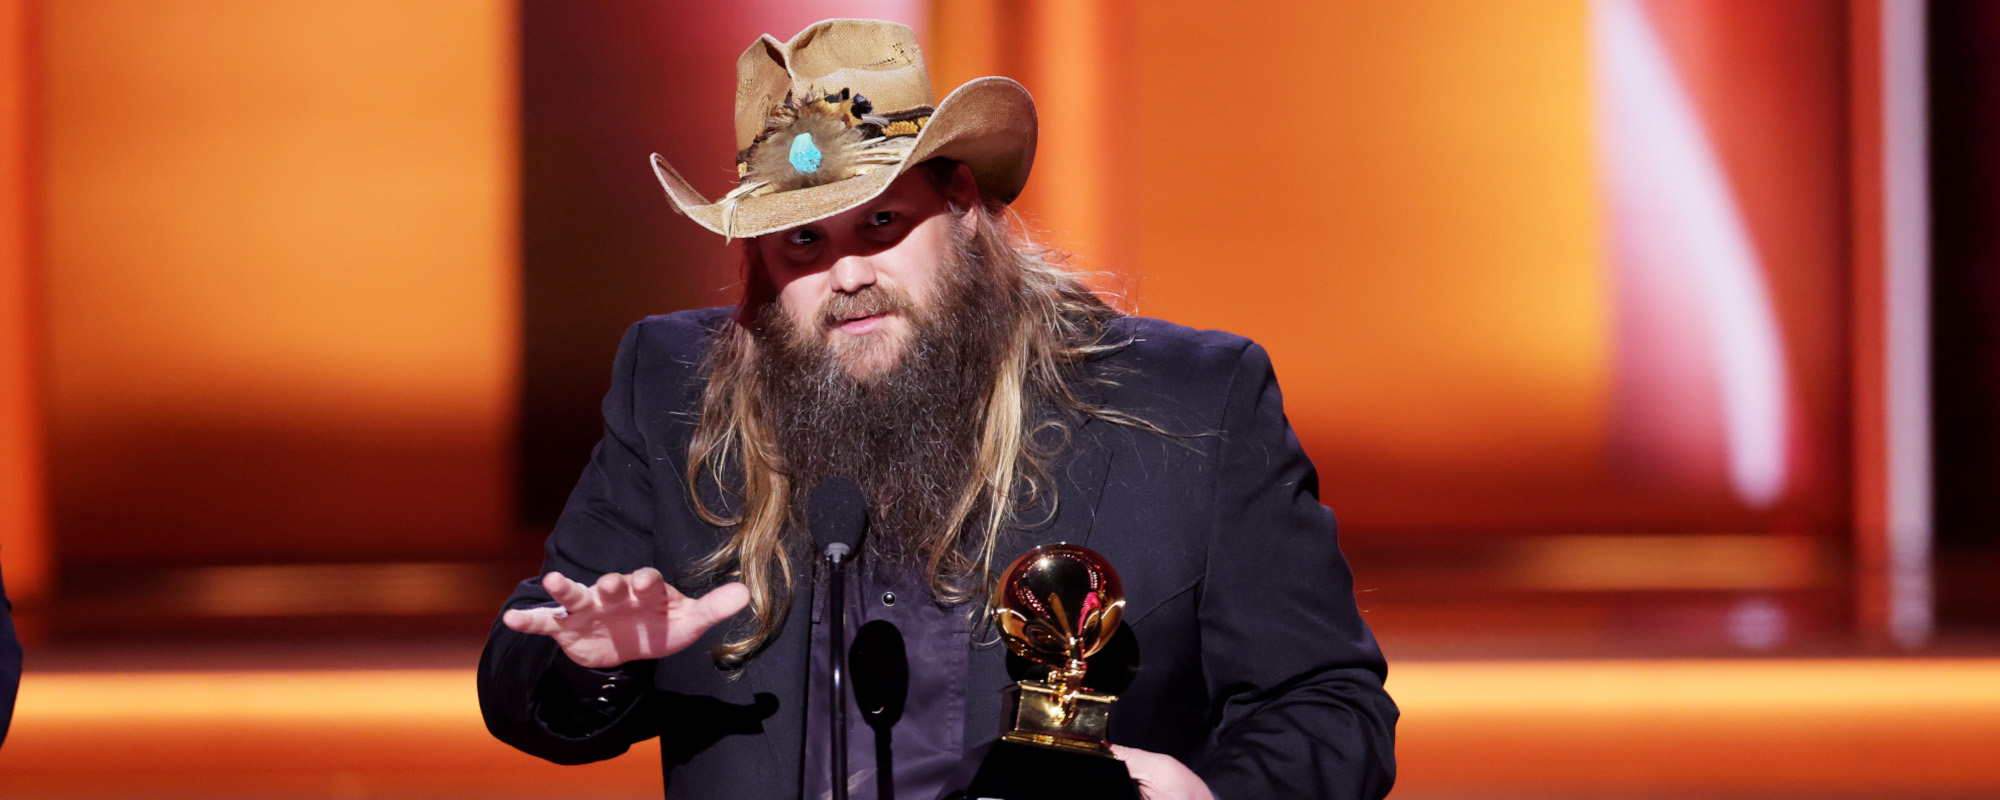 Chris Stapleton Confirms Slew of 2022 Tour Dates, Adds Several New Shows